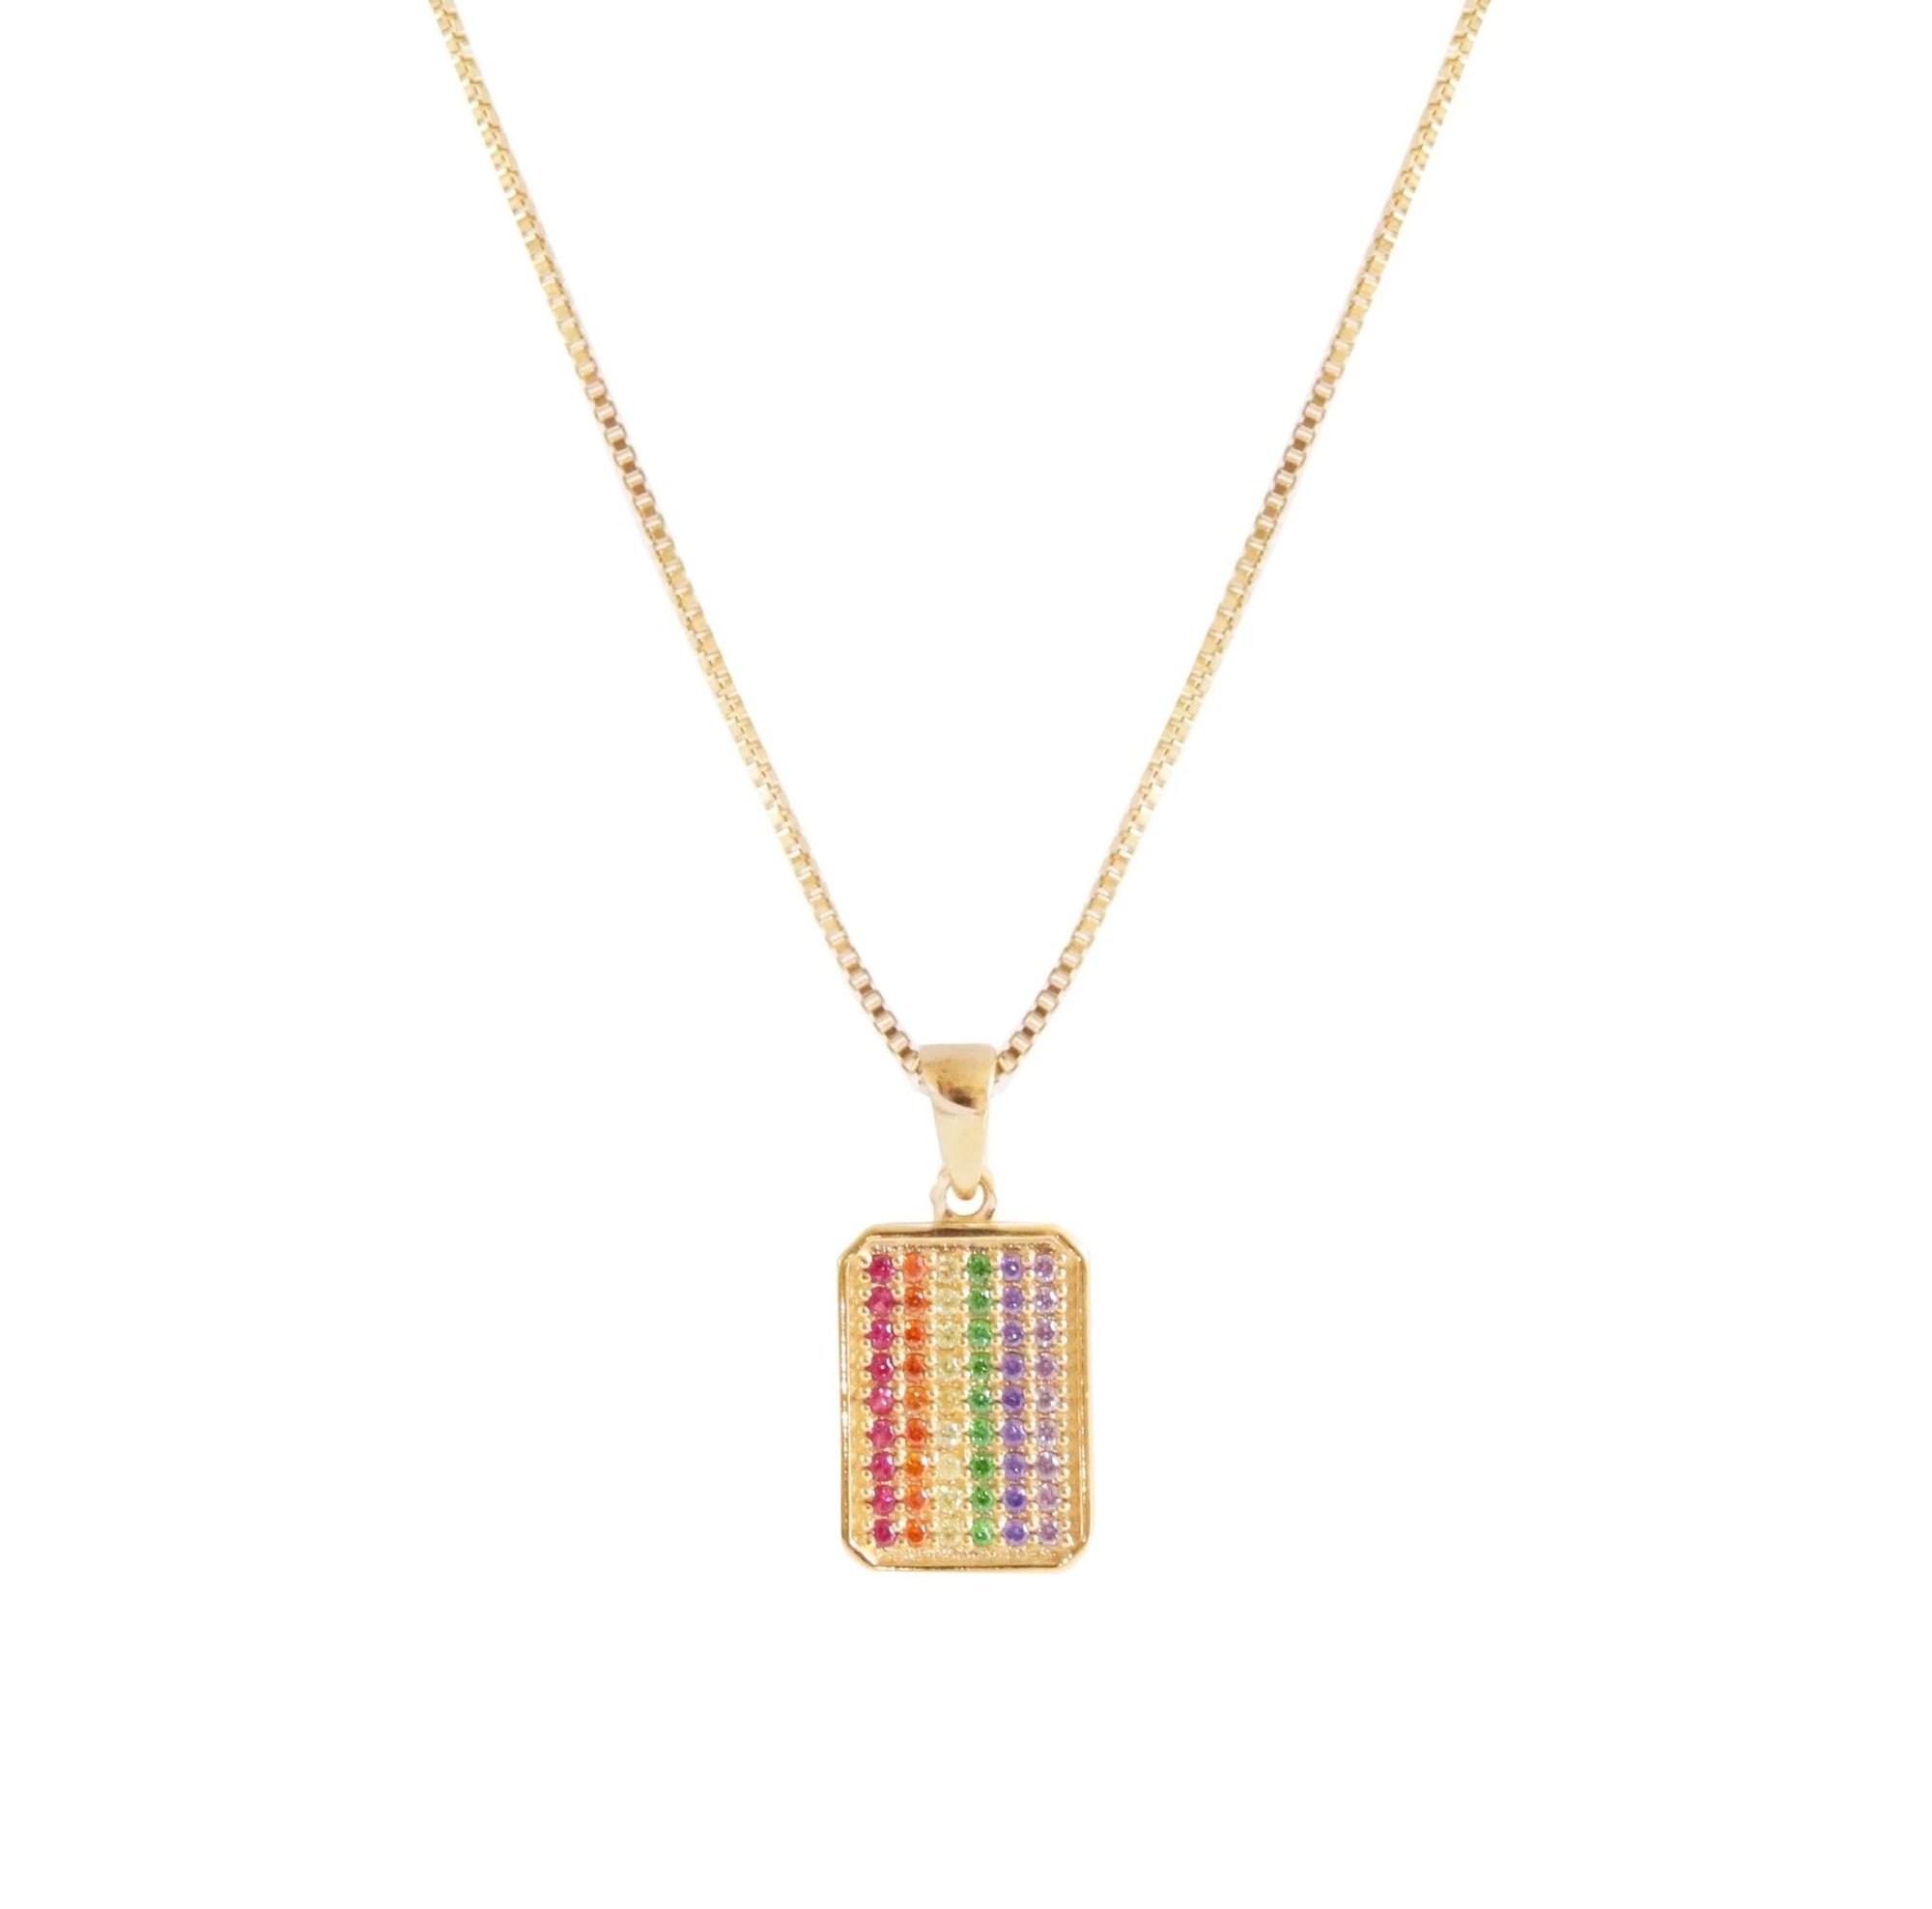 LOVE DAINTY DOG TAG NECKLACE - RAINBOW CUBIC ZIRCONIA & GOLD - SO PRETTY CARA COTTER